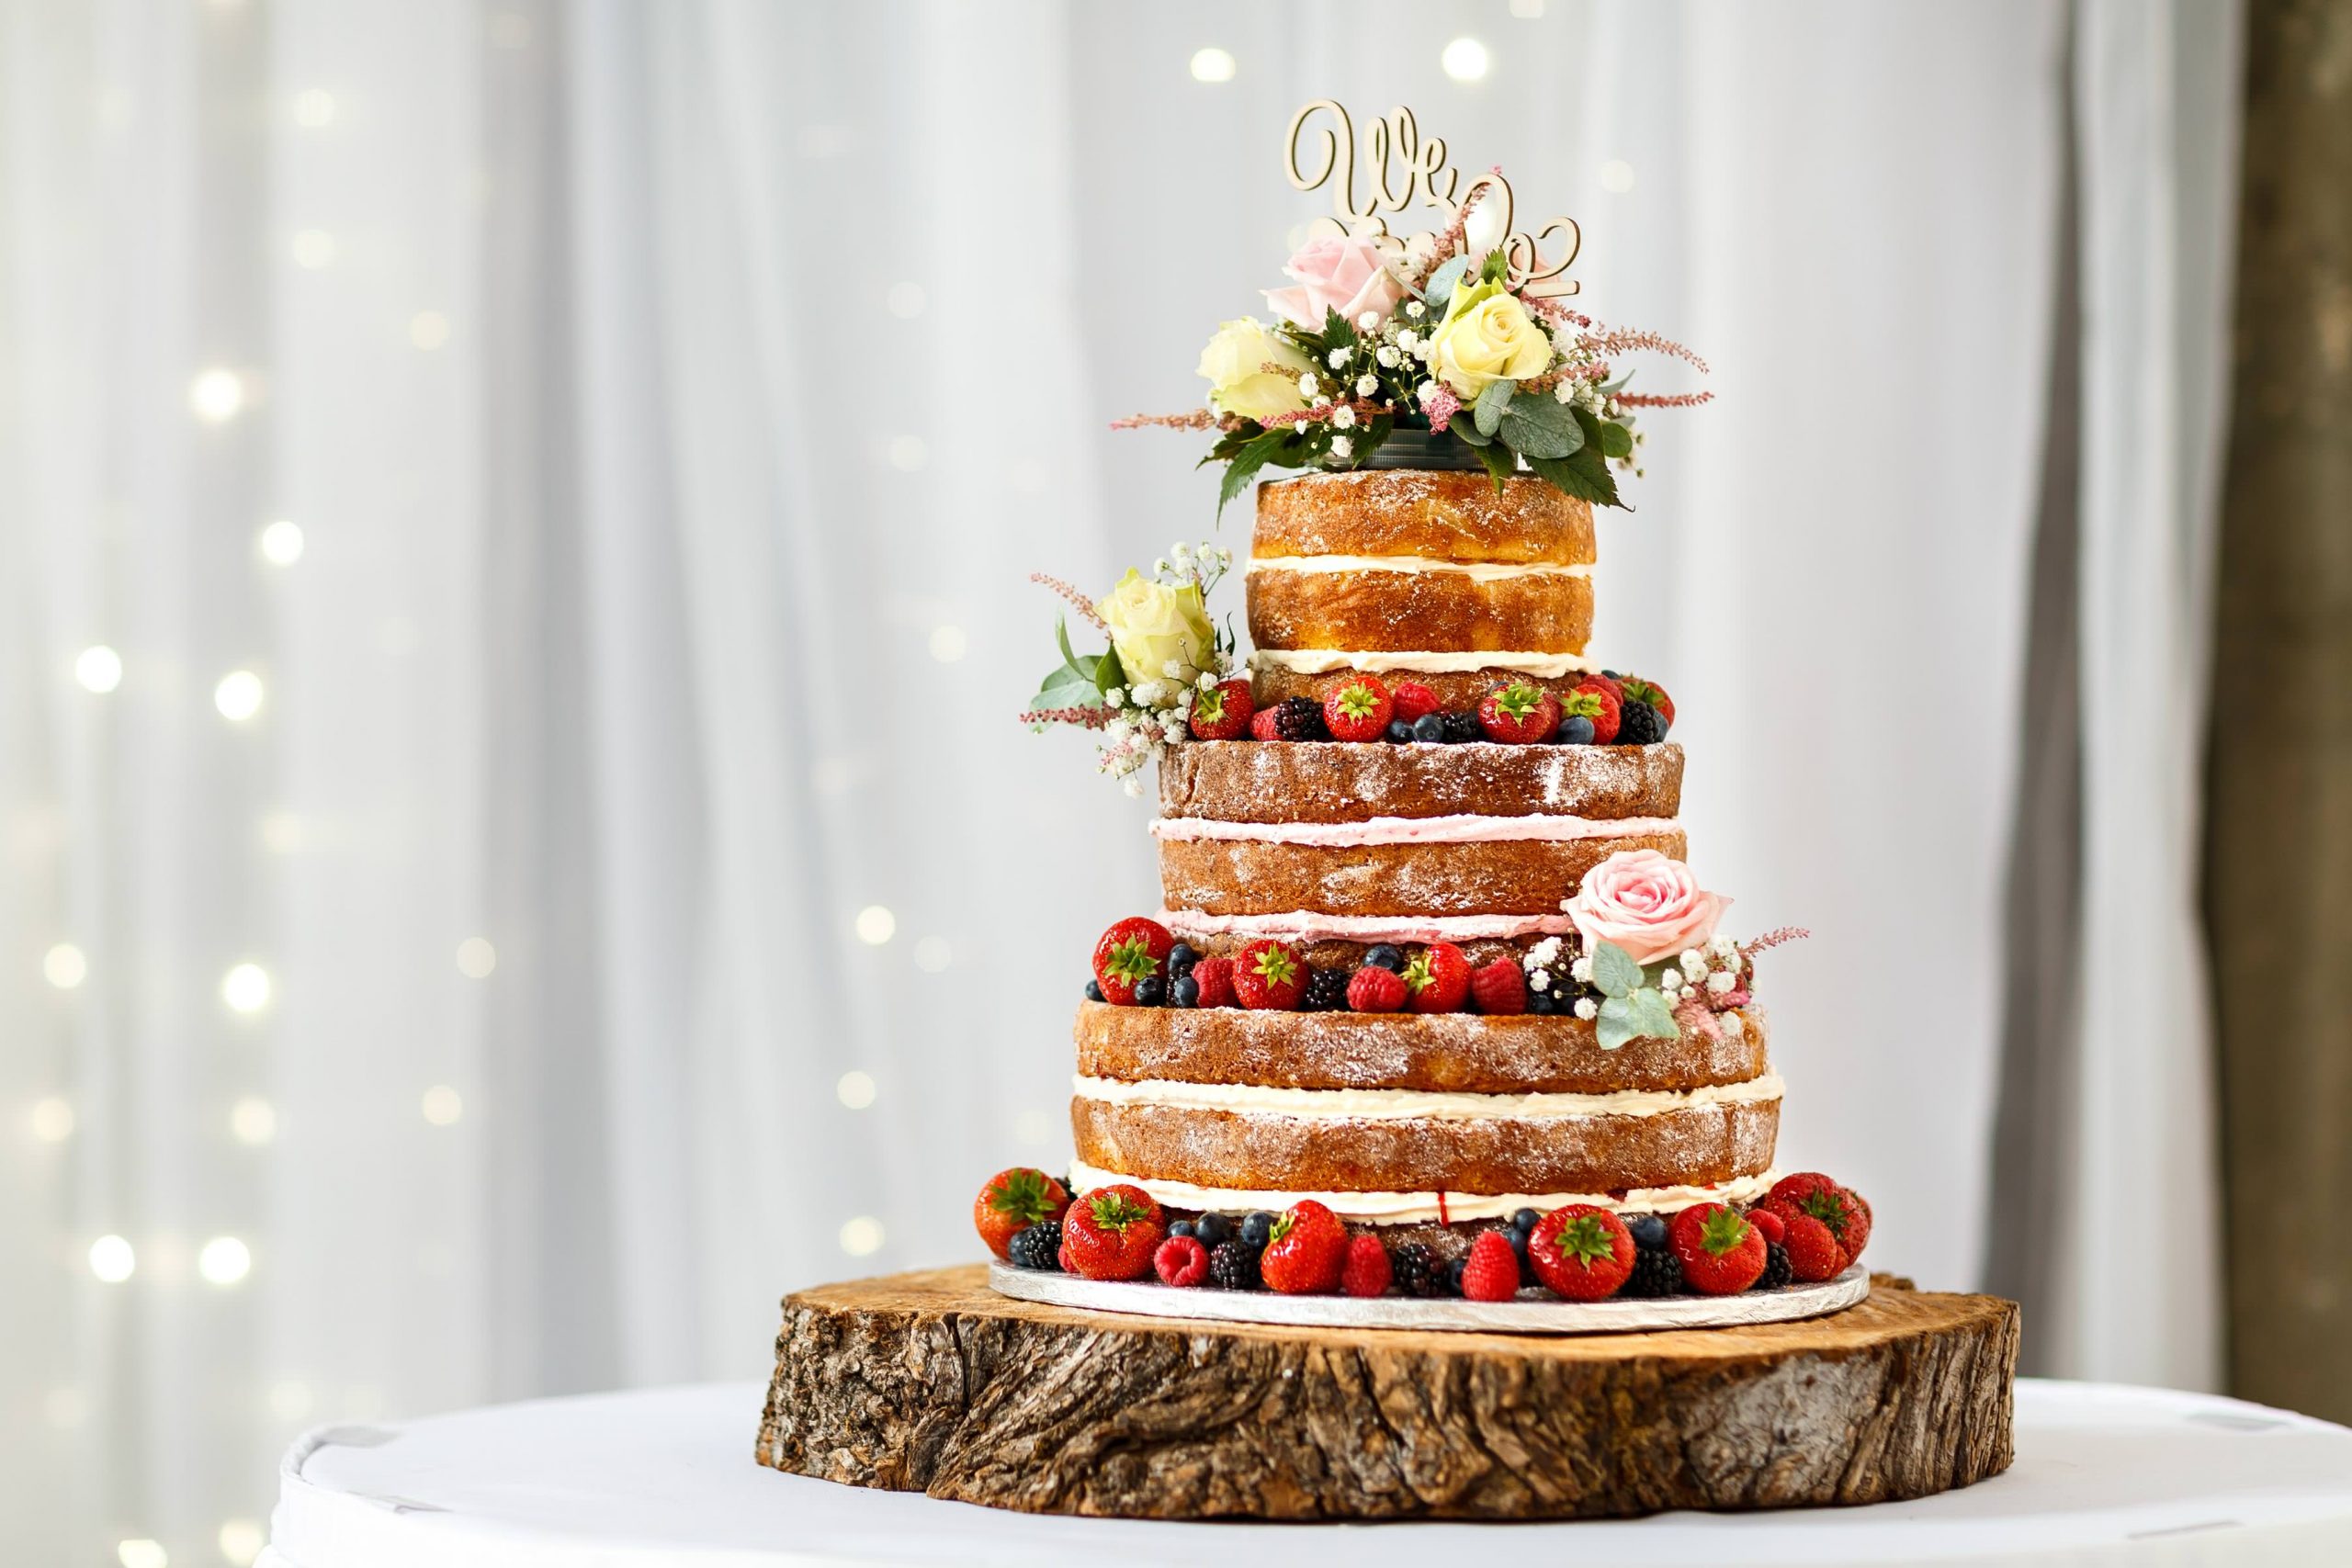 How Much Should Your Wedding Cake Cost?